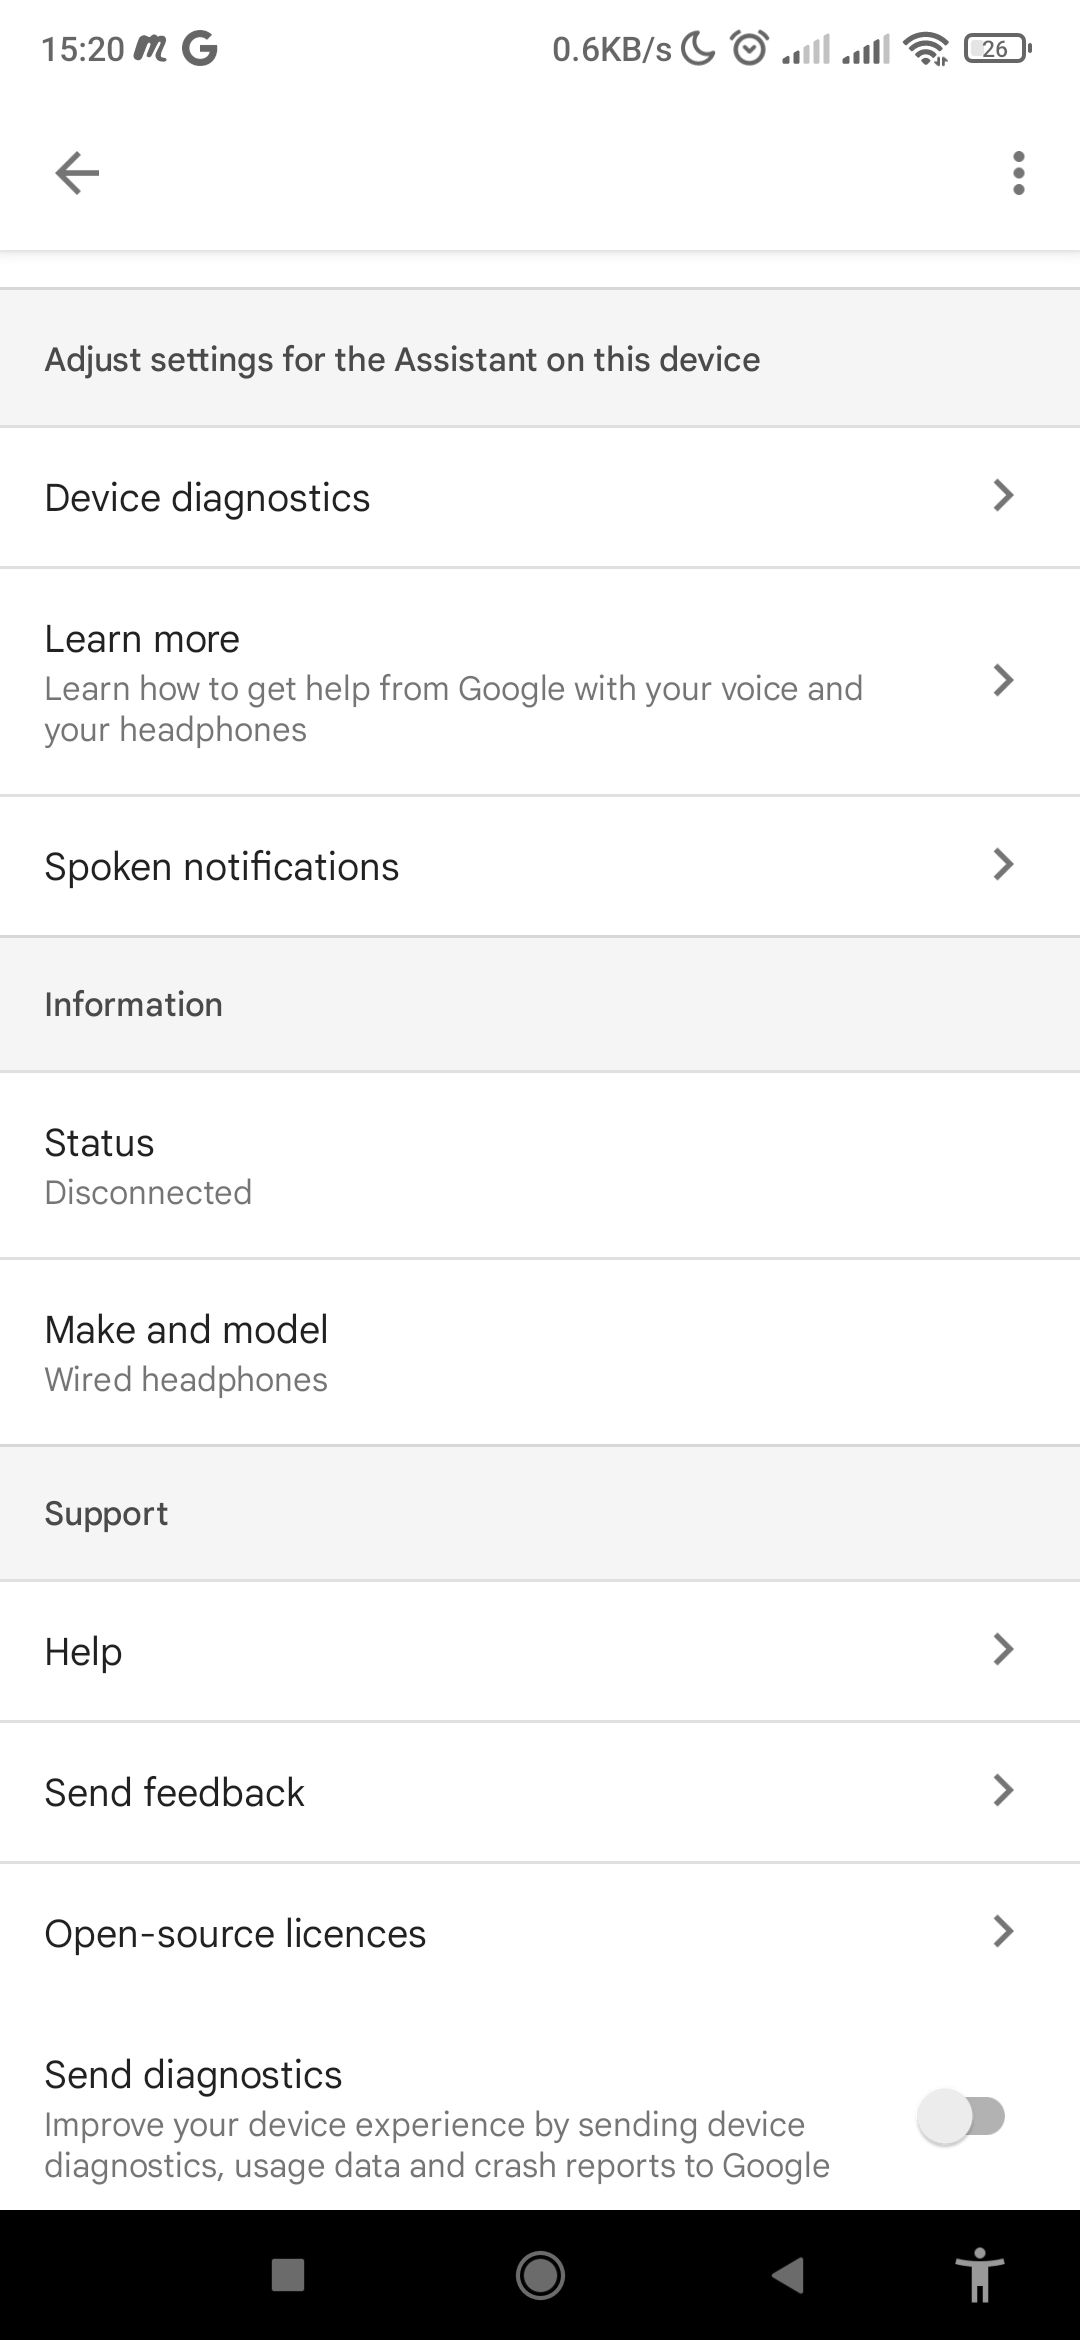 Setting up spoken notifications on Google Assistant